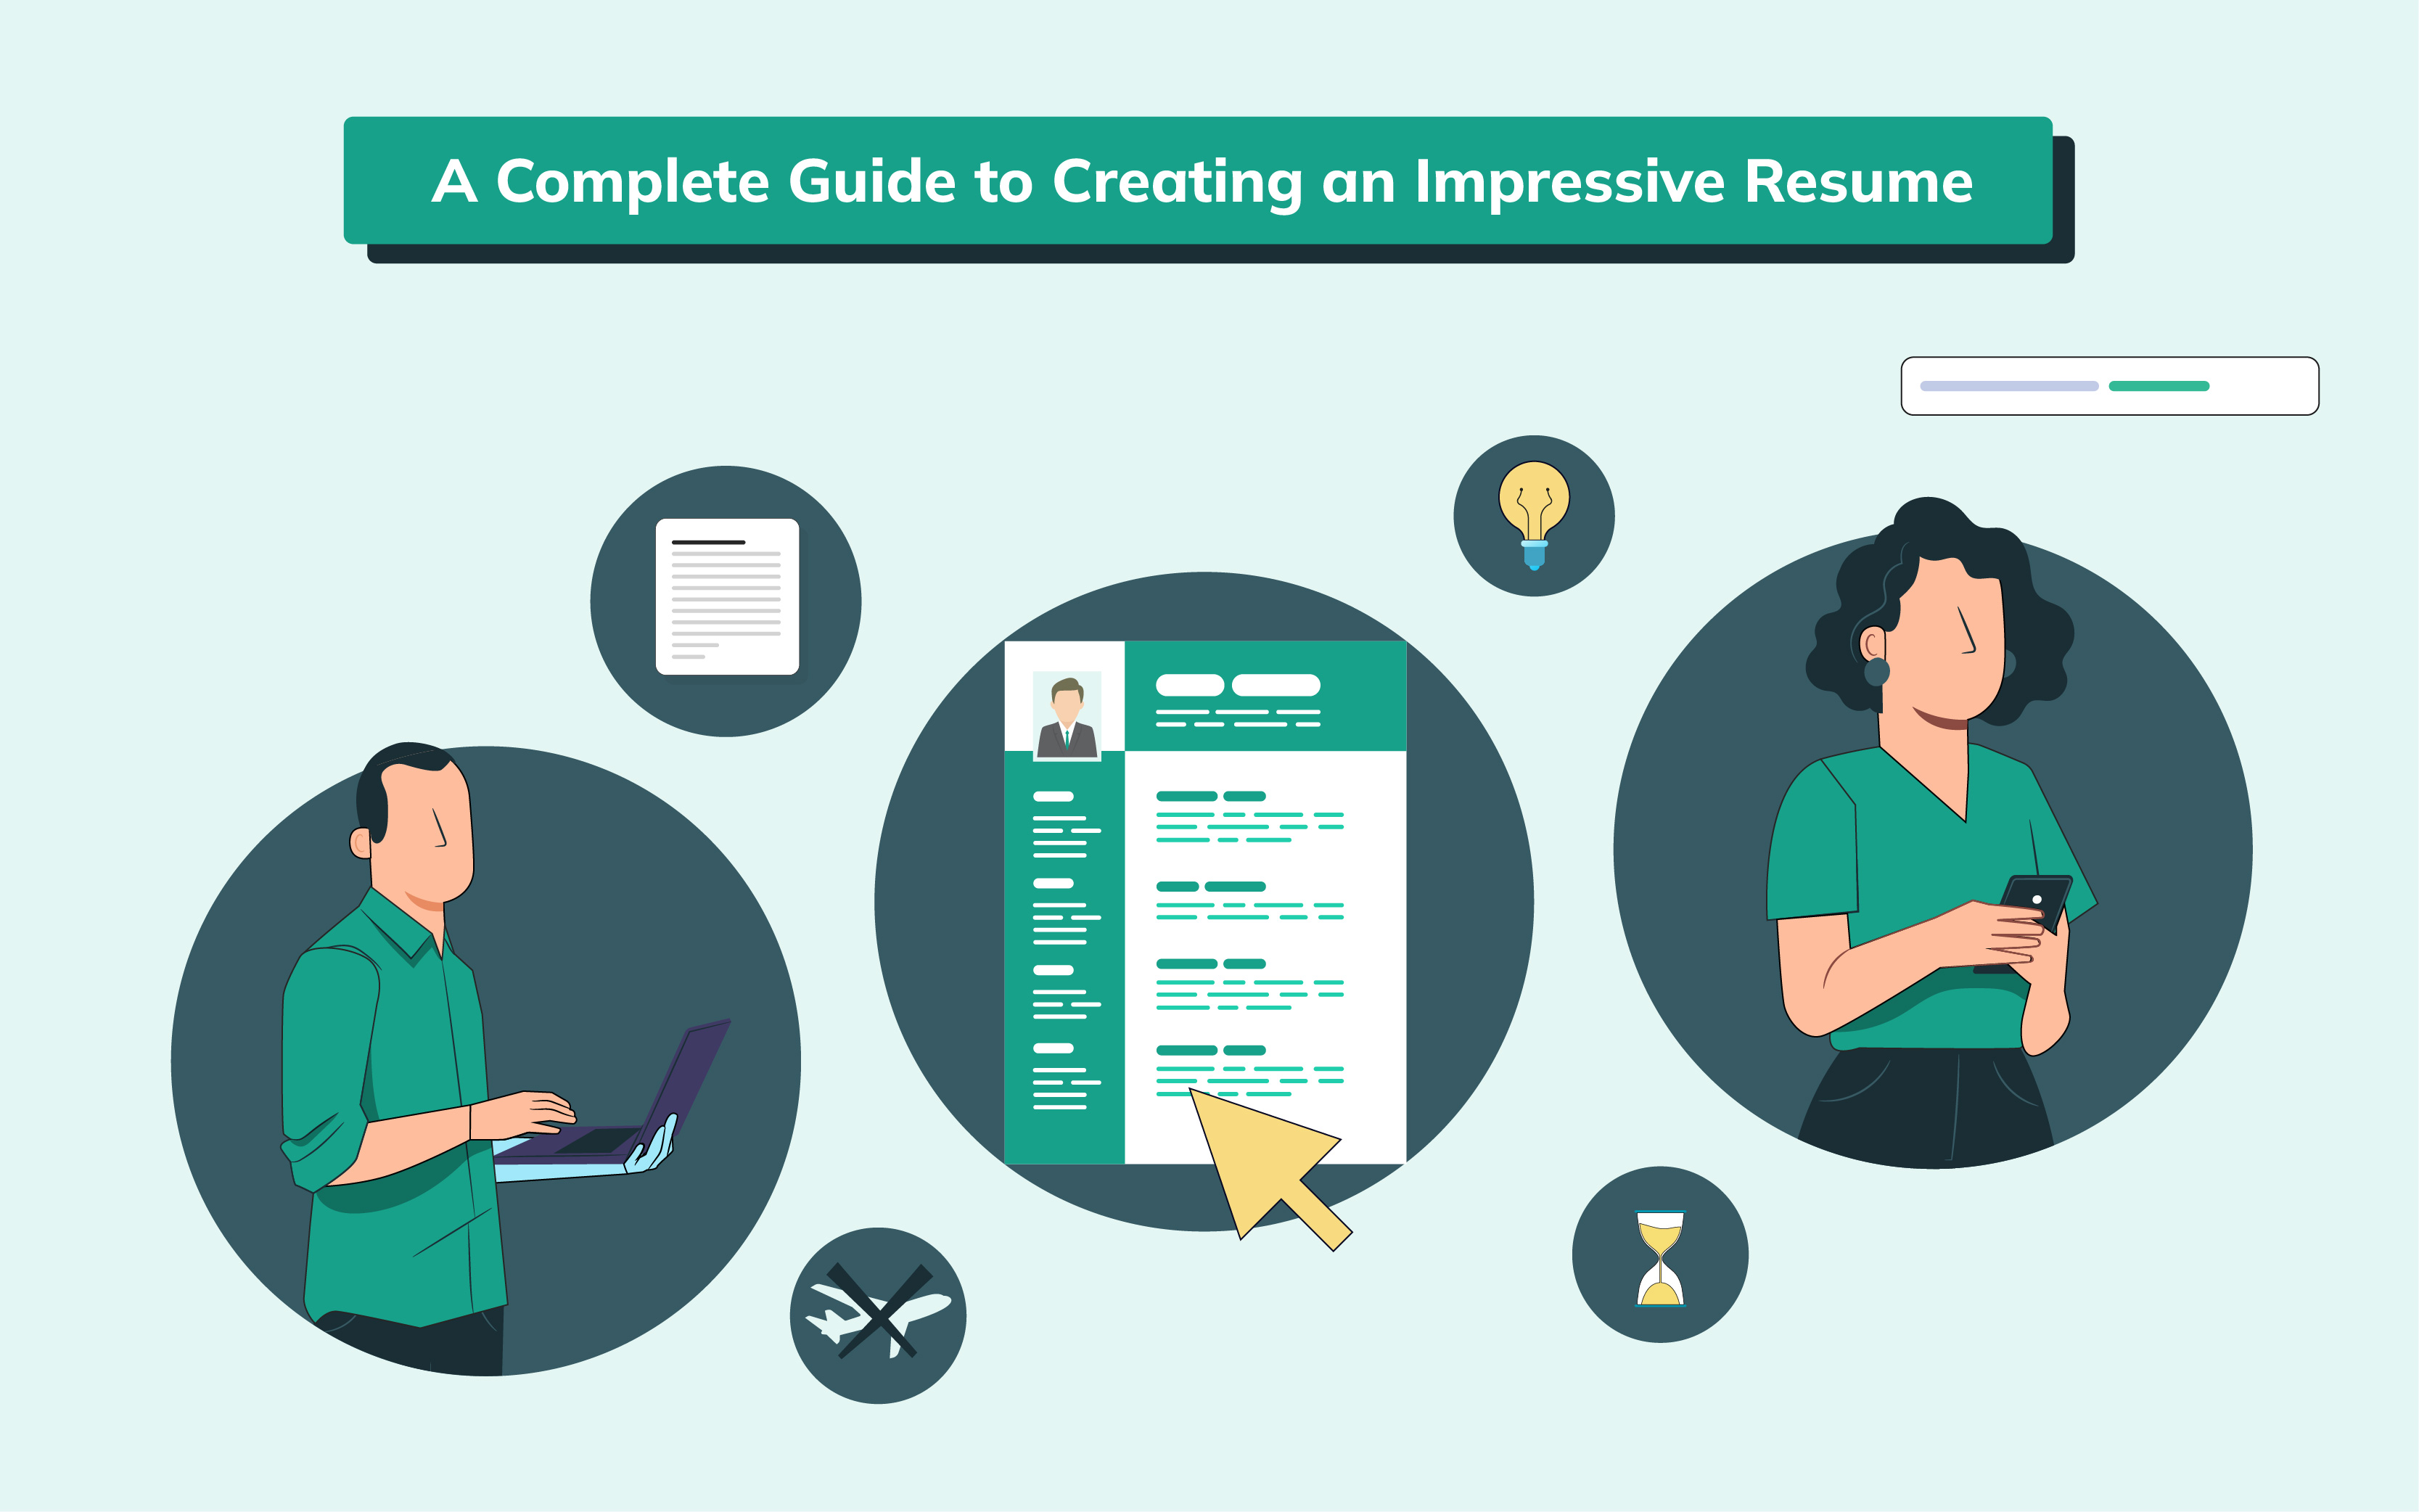 How to Make a Resume and Get Job Ready in Just 15 Minutes - Featured Image